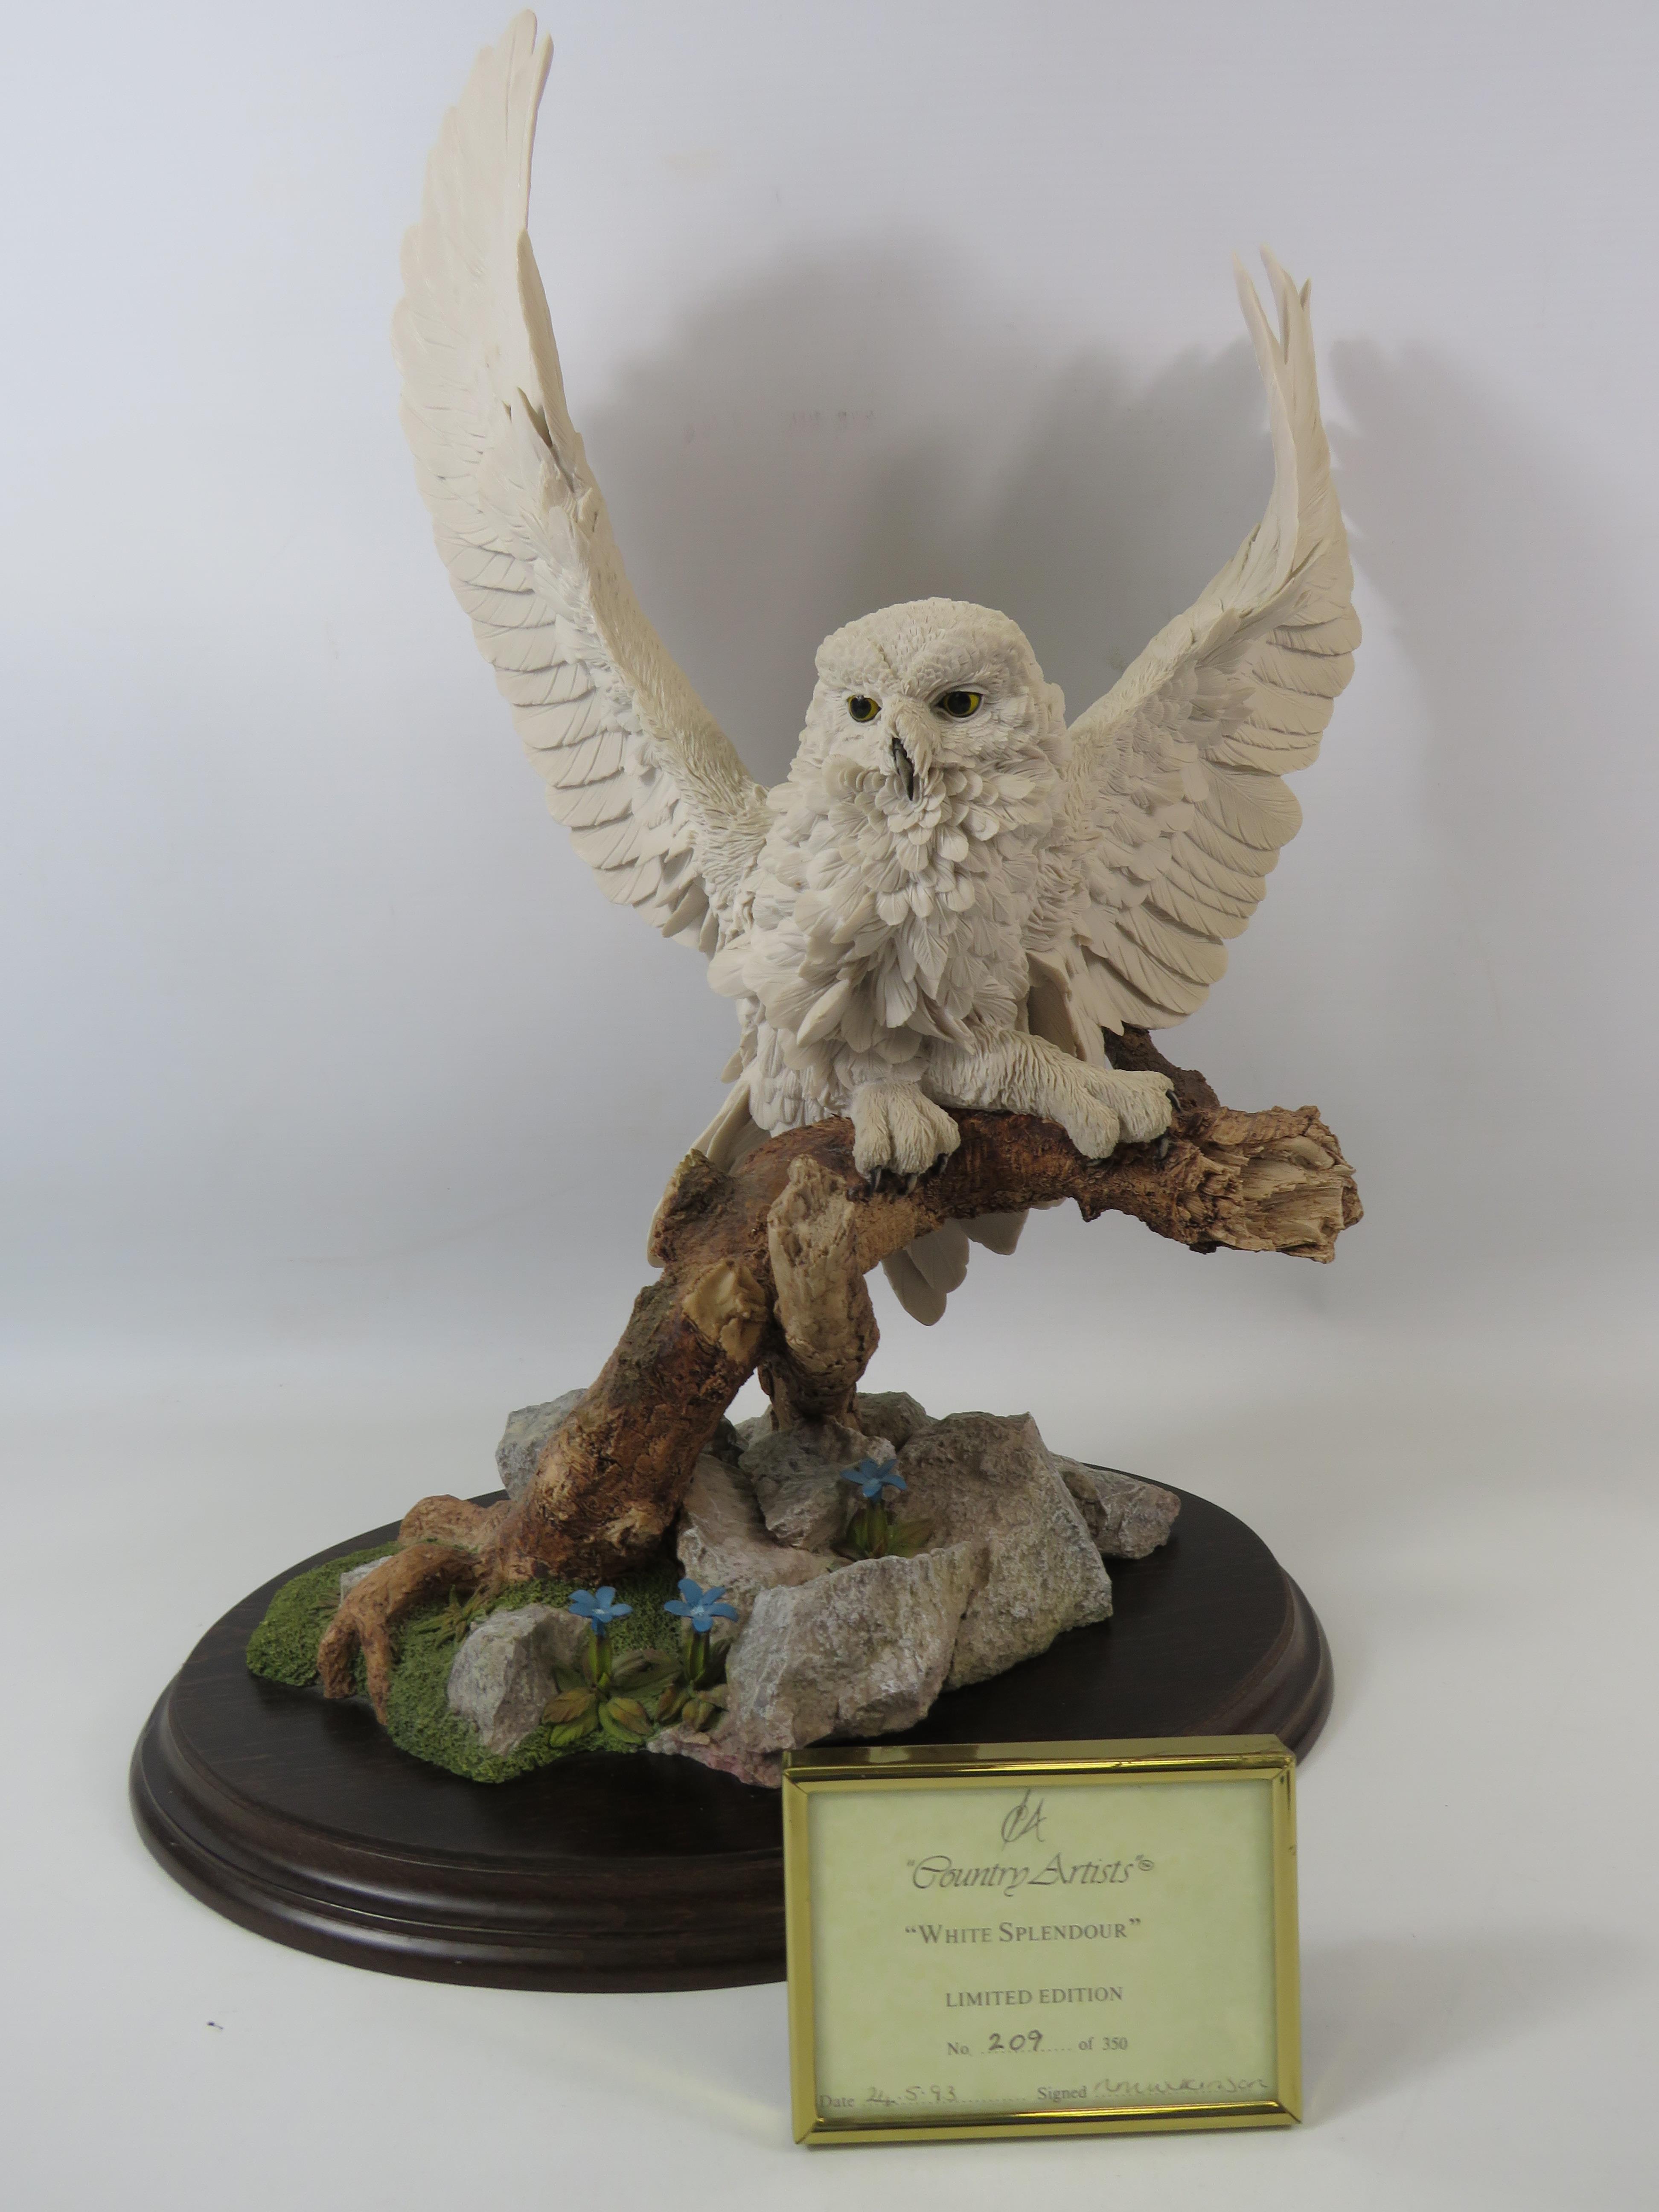 Large Country Artist limited edition sculpture of an Owl "White Splender" No 209 of 350 with cert no